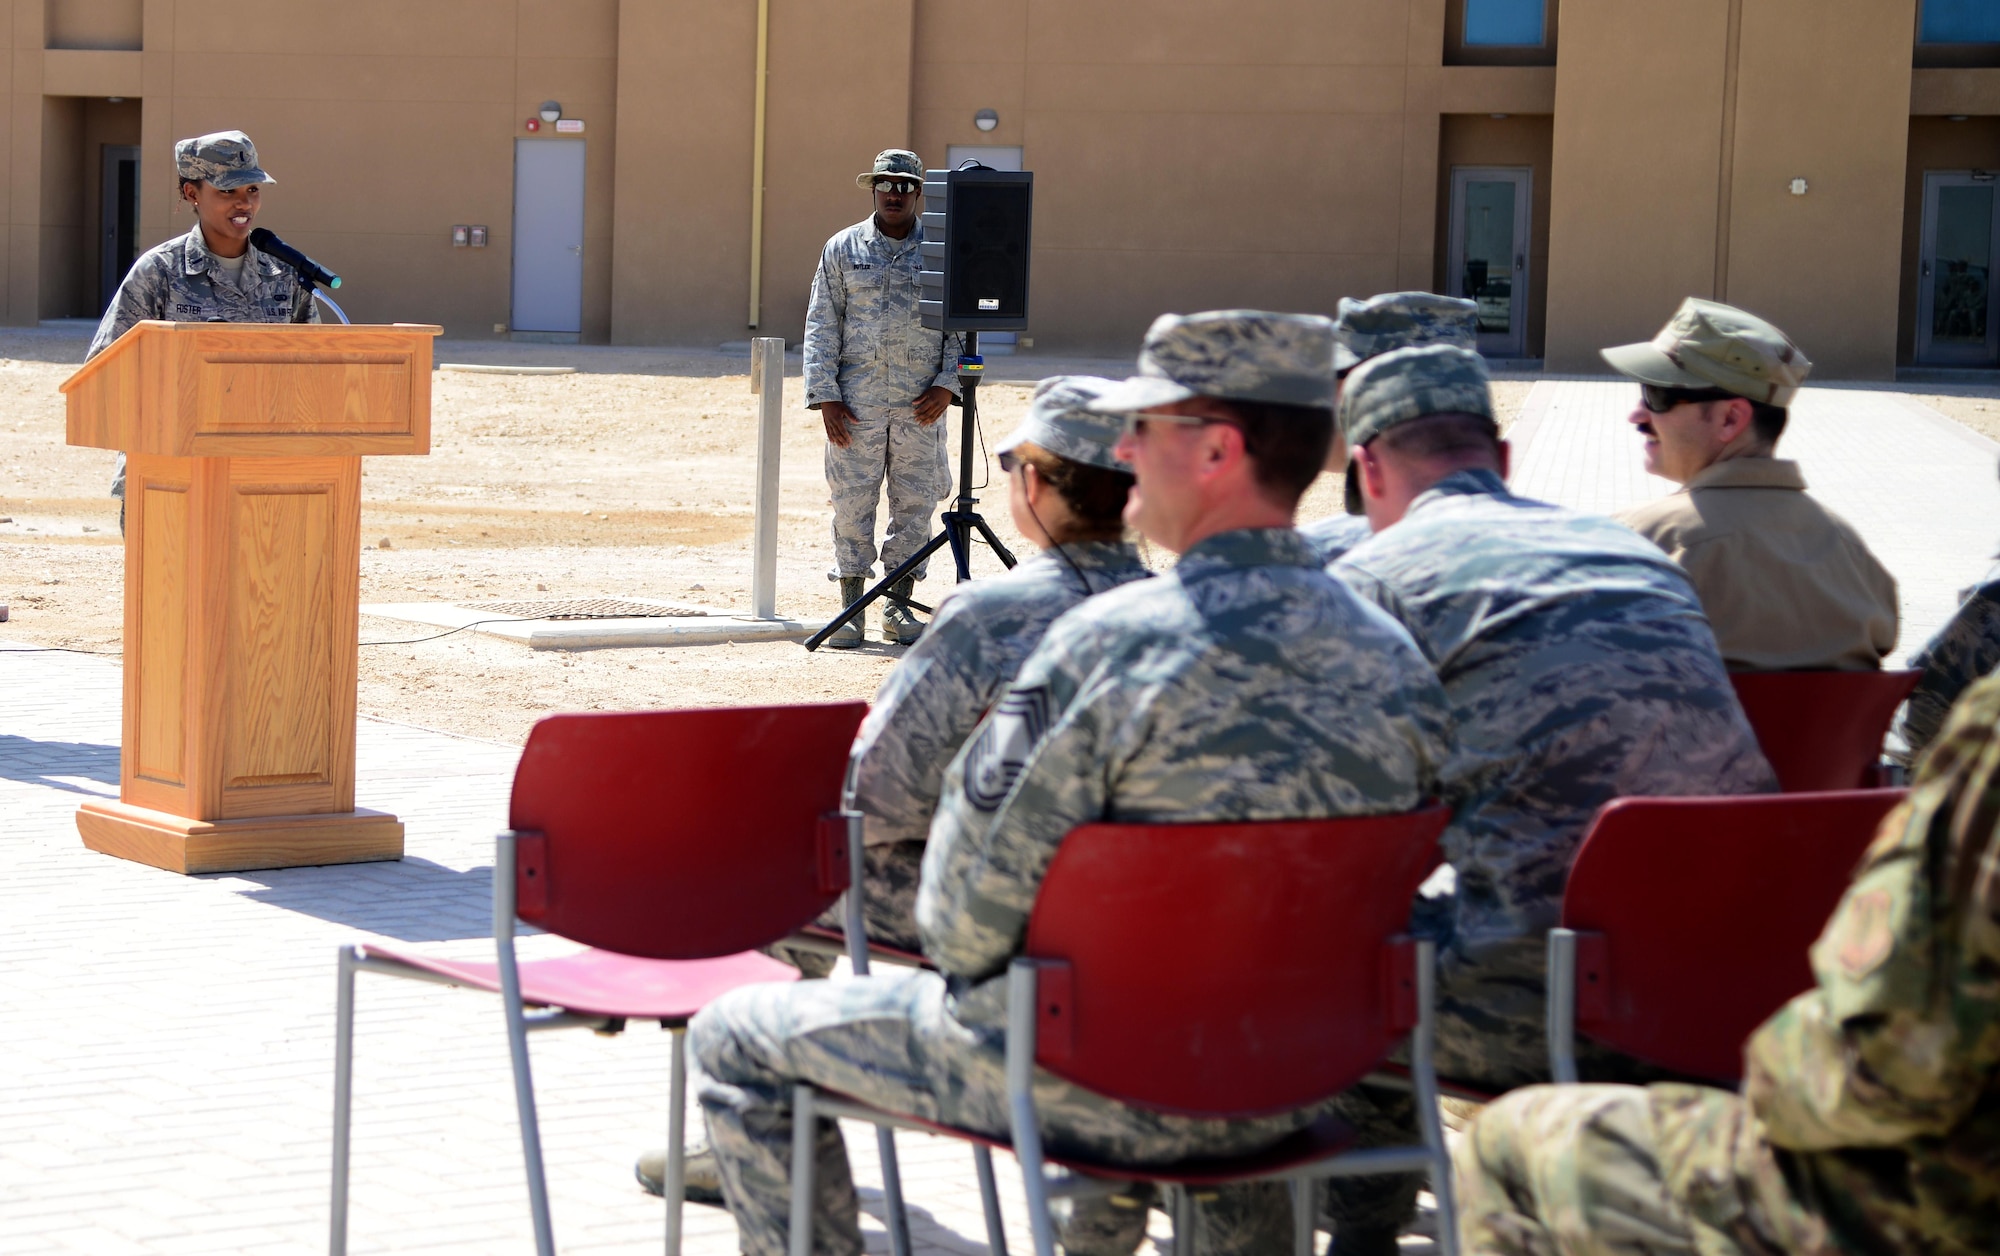 U.S. Air Force 1st Lt. Alisha Foster,  379th Expeditionary Force Support Squadron deputy sustainment flight commander, gives opening remarks during a linen cutting ceremony, April 3, 2015, at Al Udeid Air Base, Qatar. The linen cutting ceremony symbolized the opening of the new Phase II dormitories in the Blatchford-Preston Complex. (U.S. Air Force photo by Senior Airman Kia Atkins)